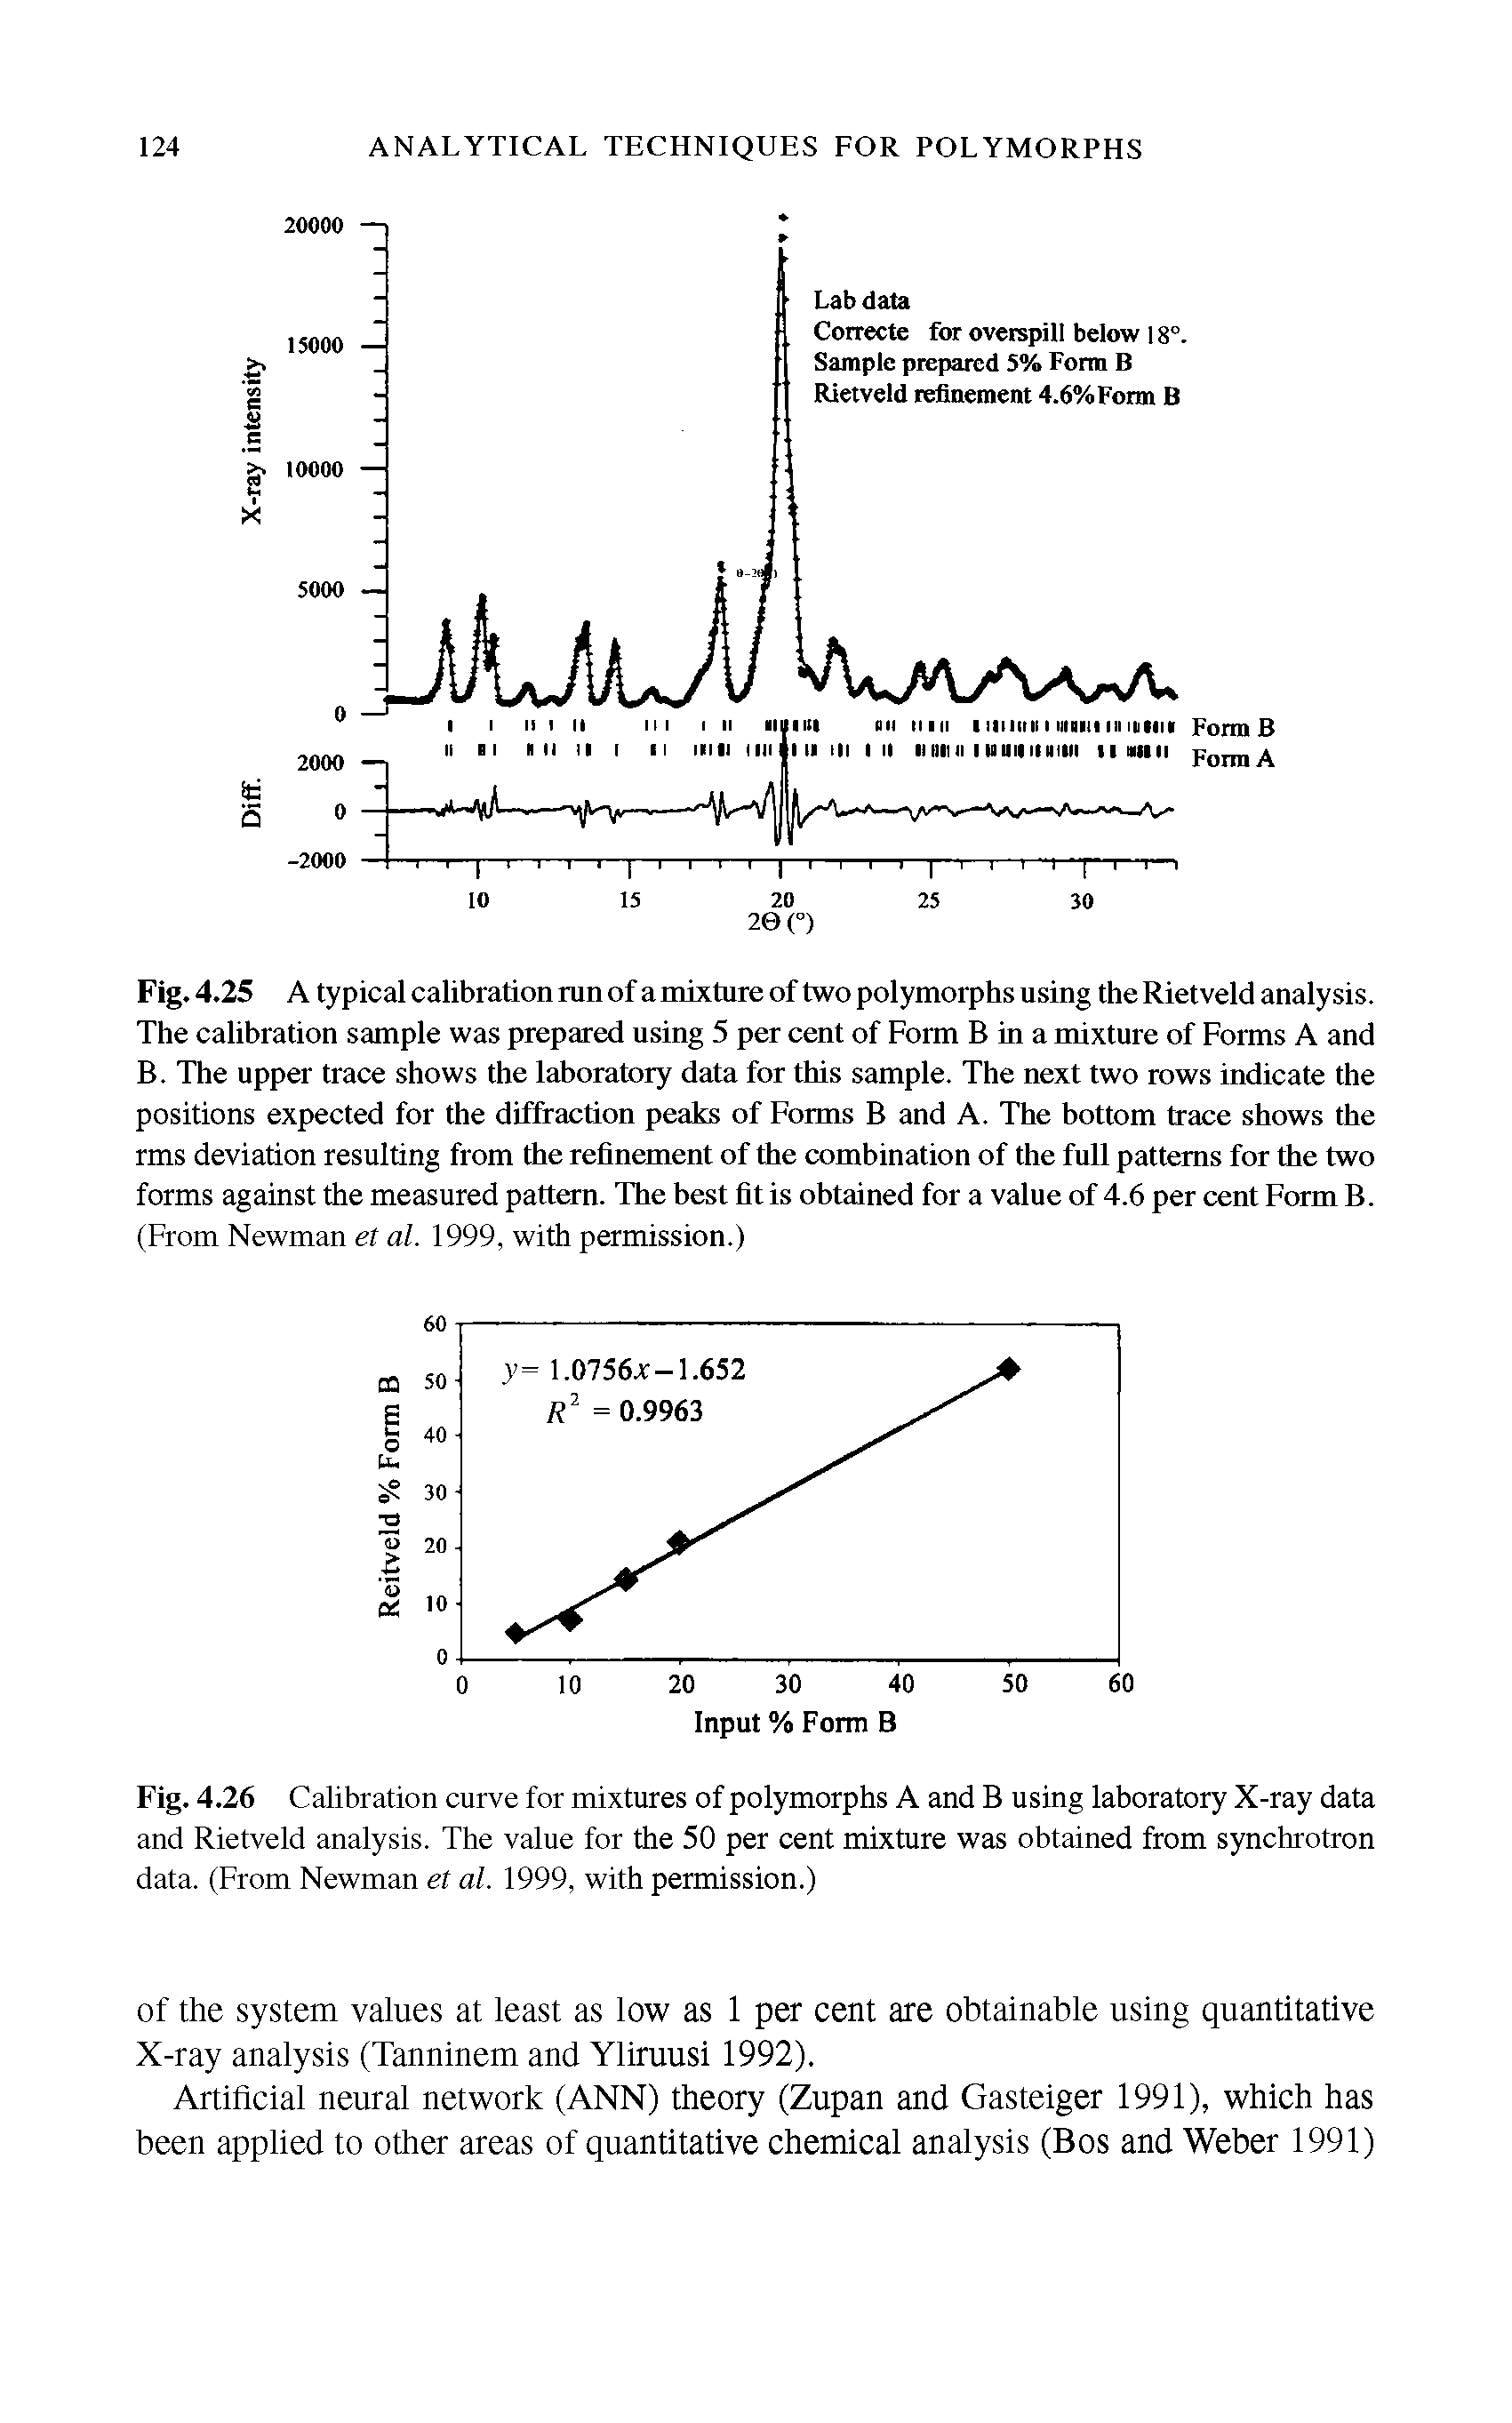 Fig. 4.26 Calibration curve for mixtures of polymorphs A and B using laboratory X-ray data and Rietveld analysis. The value for the 50 per cent mixture was obtained from synchrotron data. (From Newman et al. 1999, with permission.)...